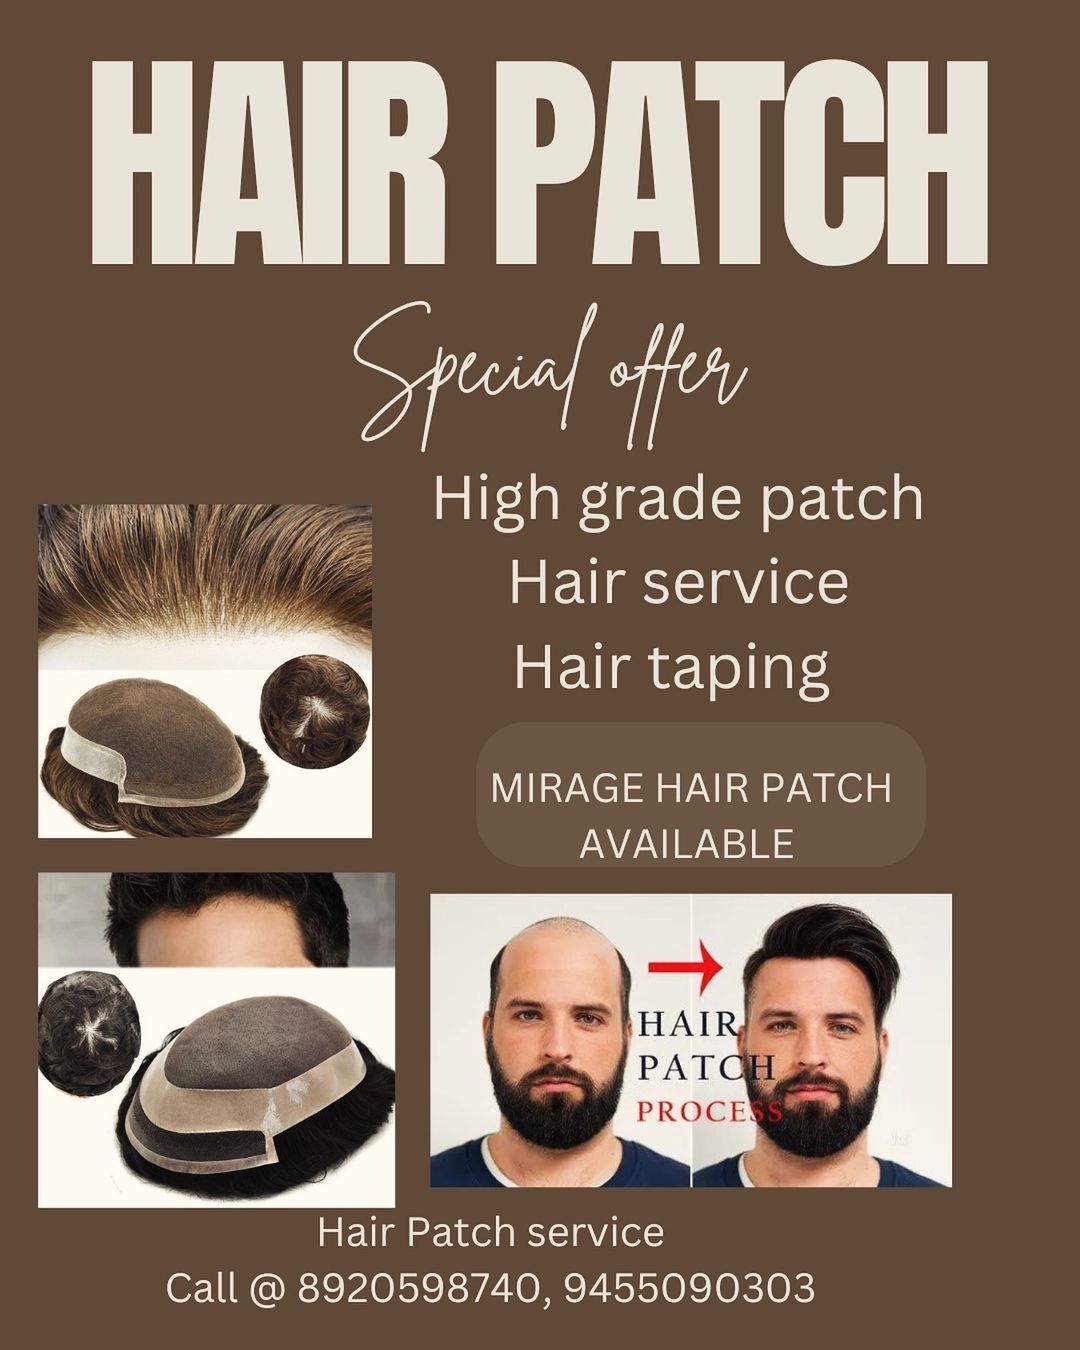 Hair Patch services for man and women